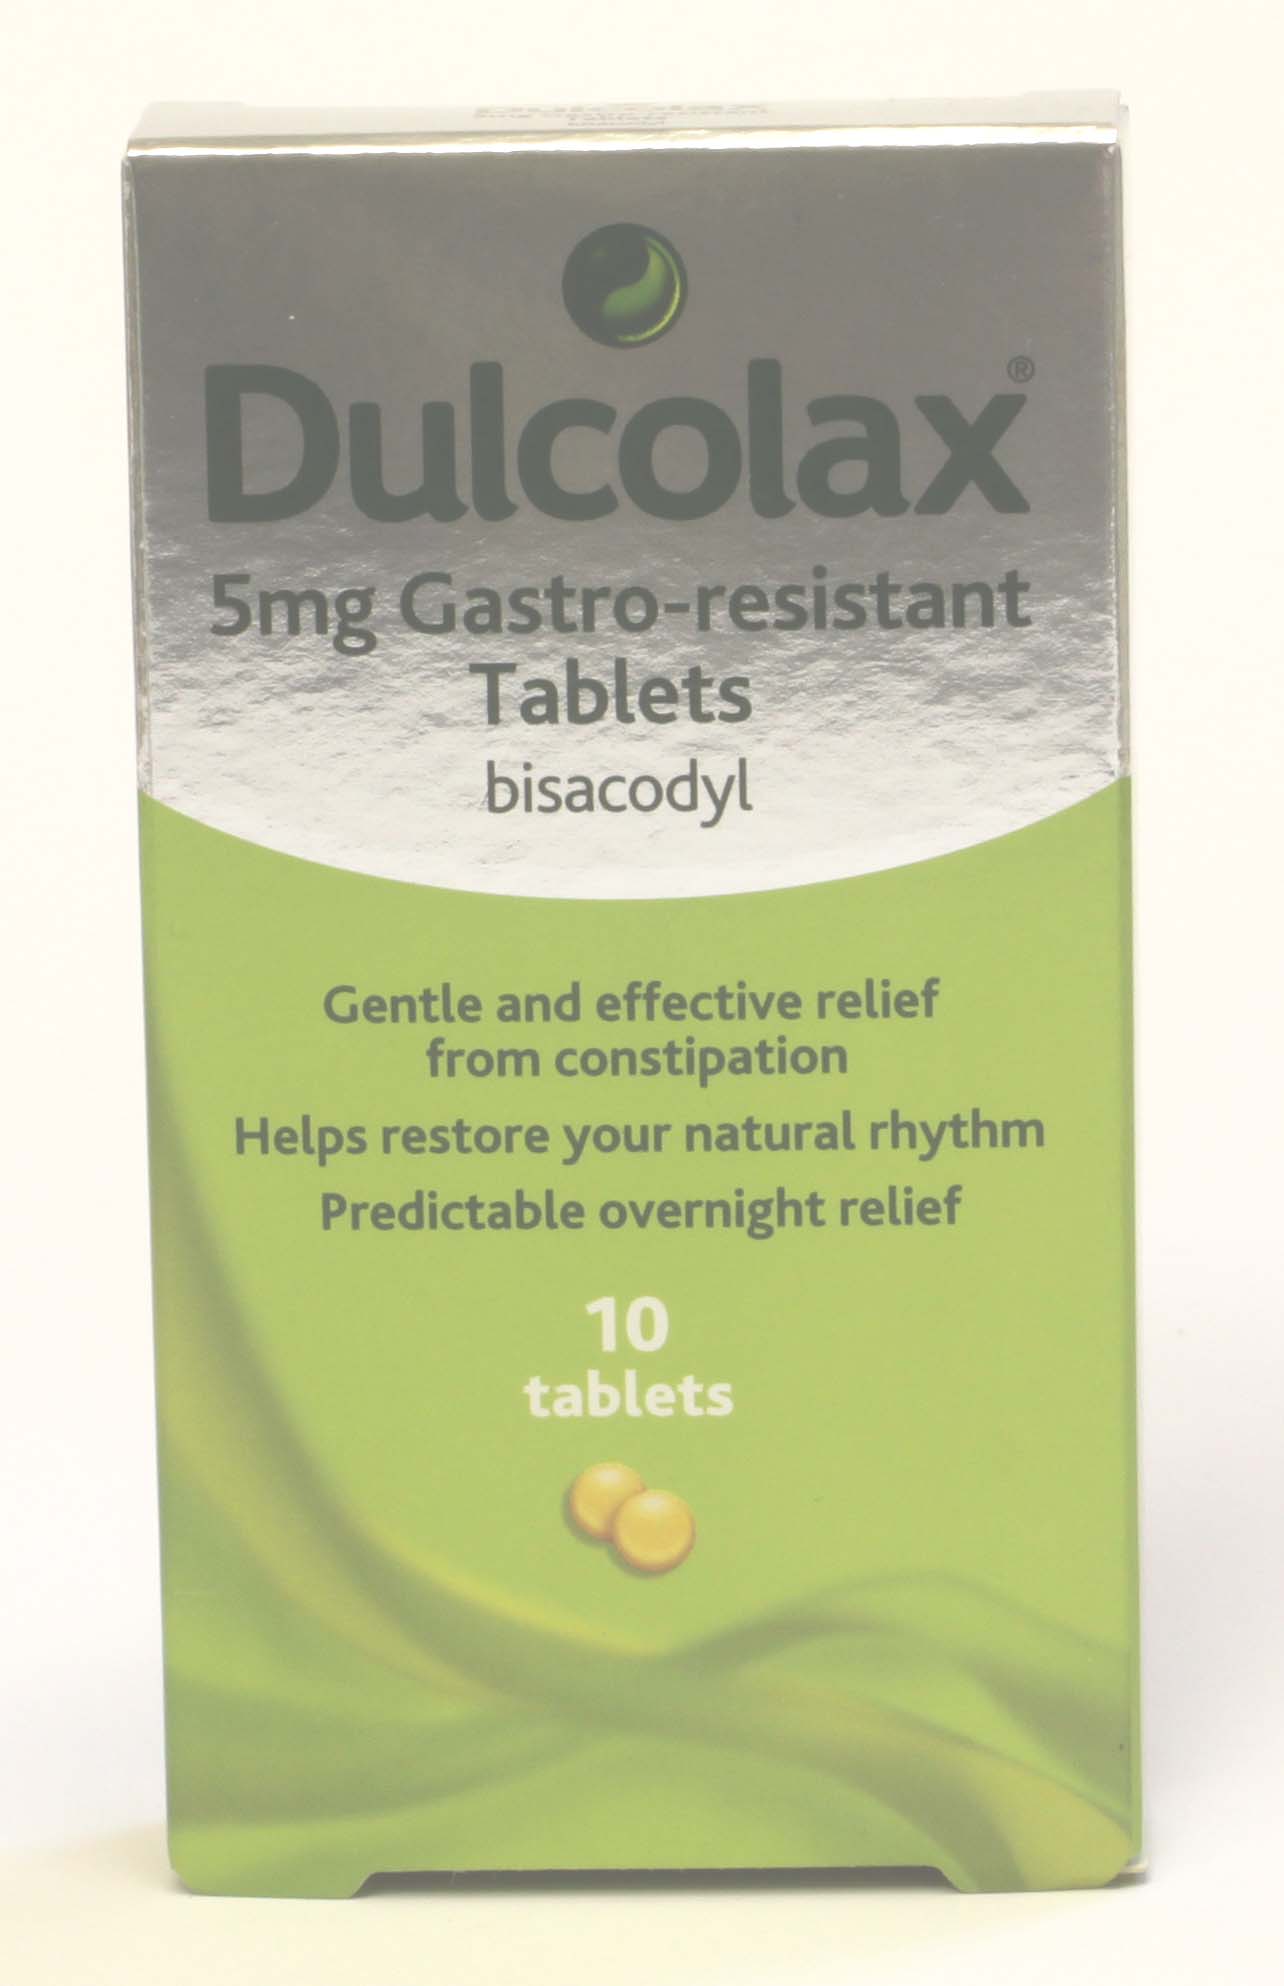 Dulcolax 5mg Gastro Resistant Tablets - 10